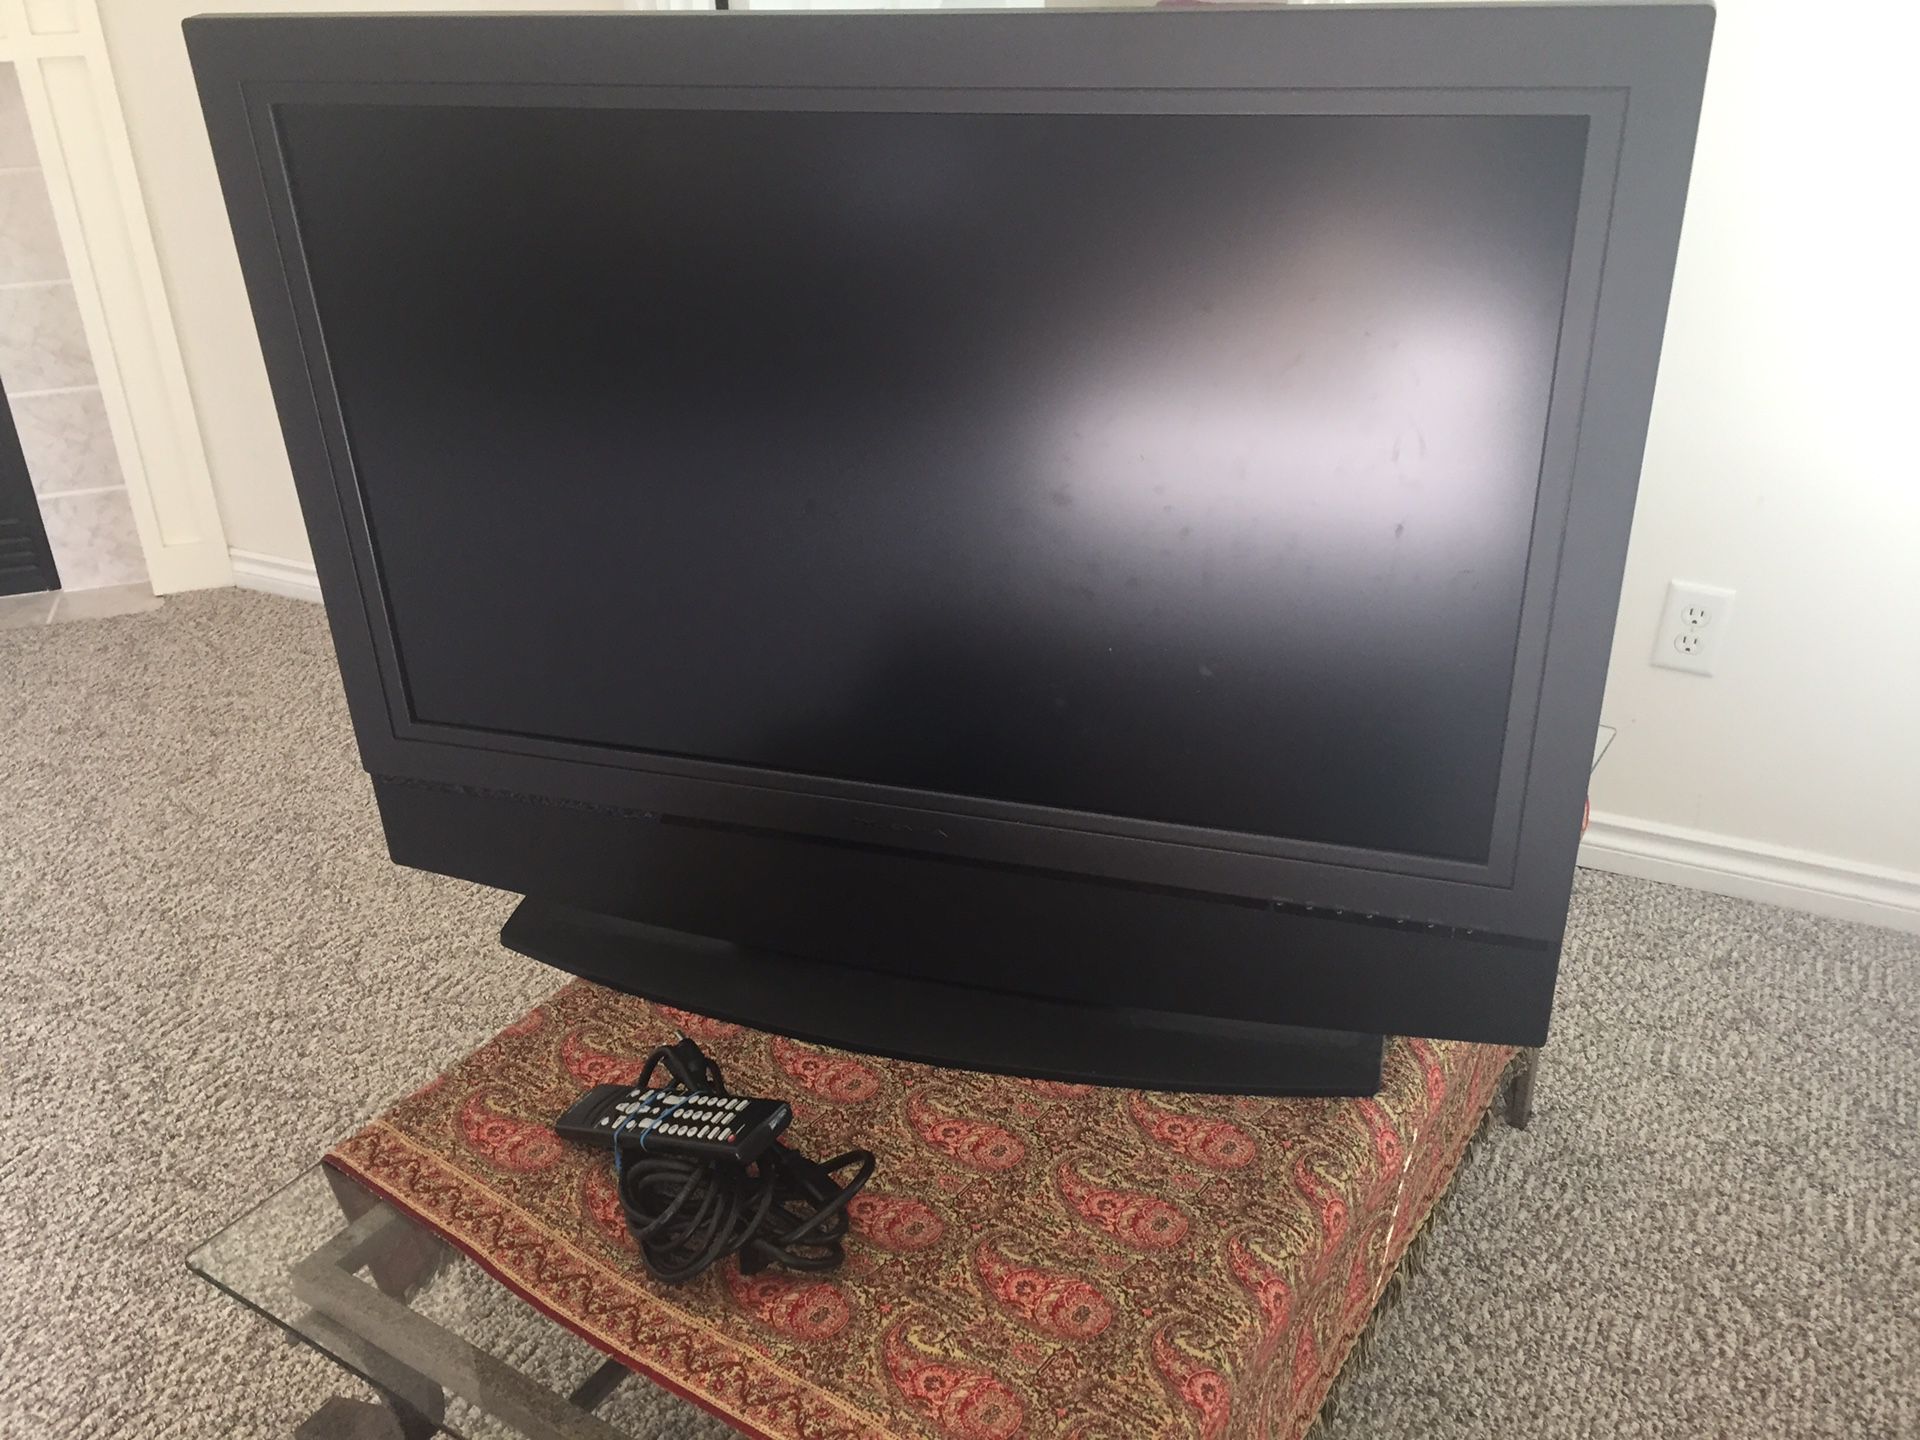 40” Flat screen tv. Barely used